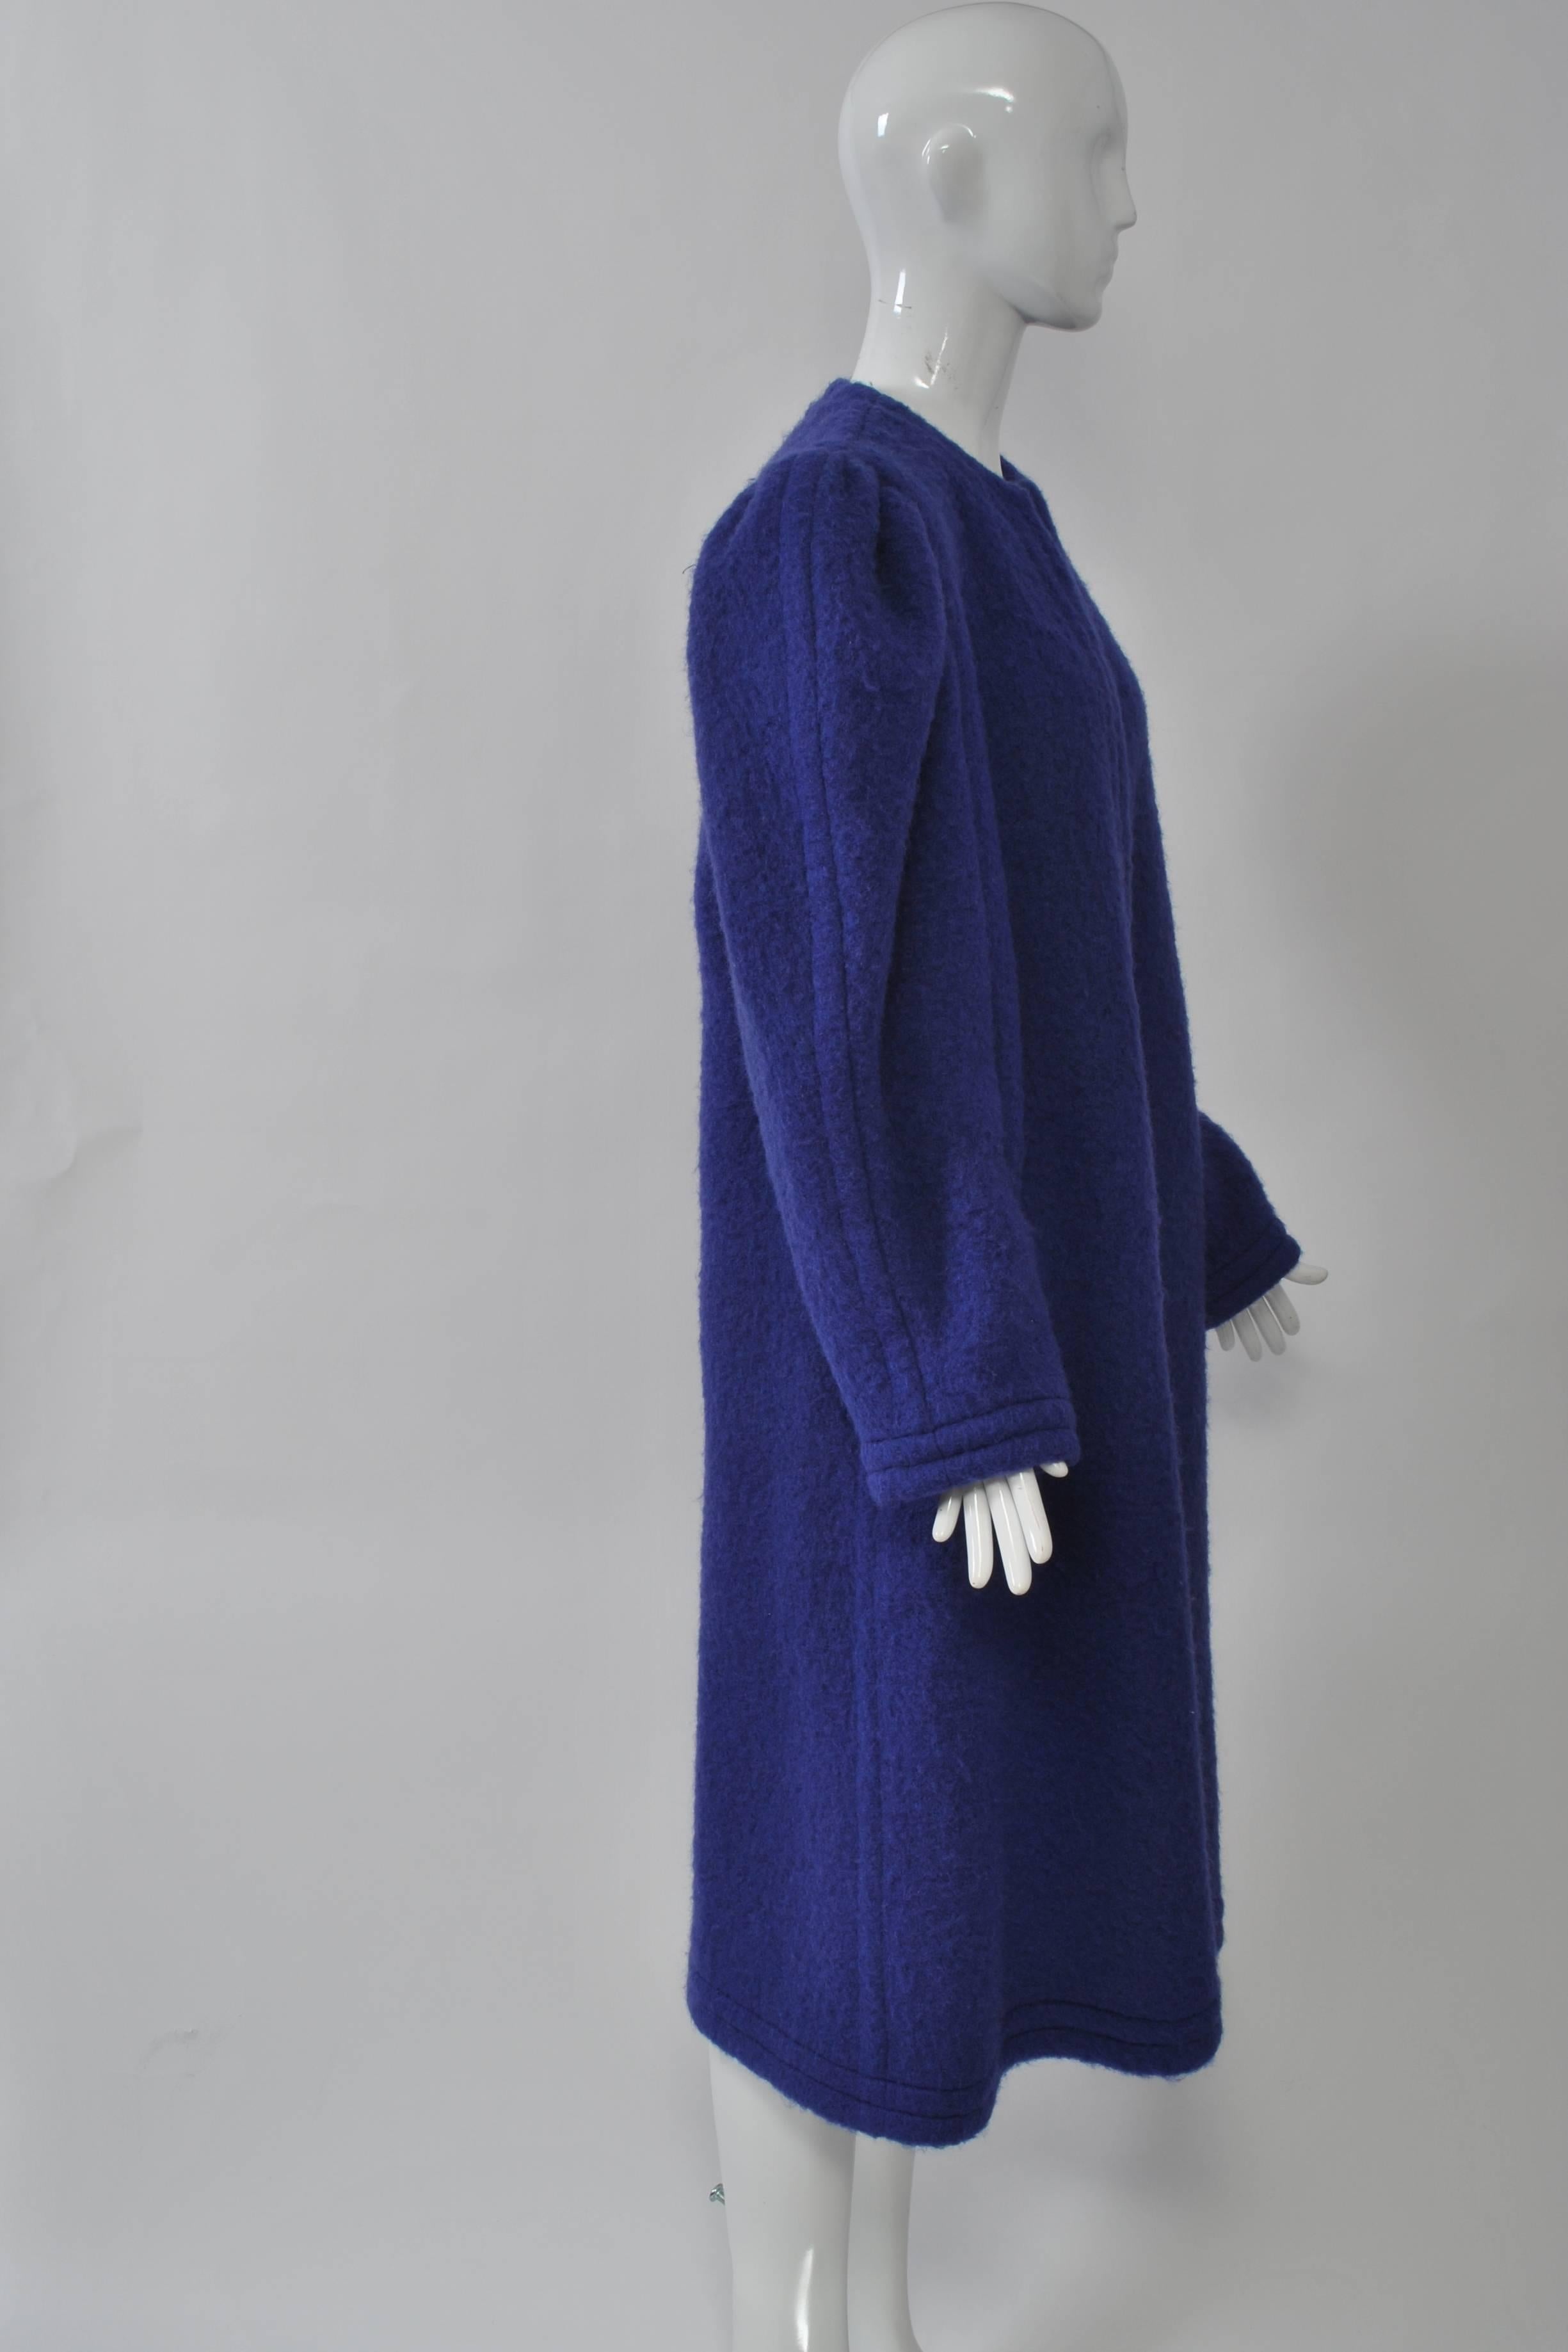 1980s mohair coat in blue violet by Lanvin features shirred puffed sleeves and open front. Double welted borders. Unlined.